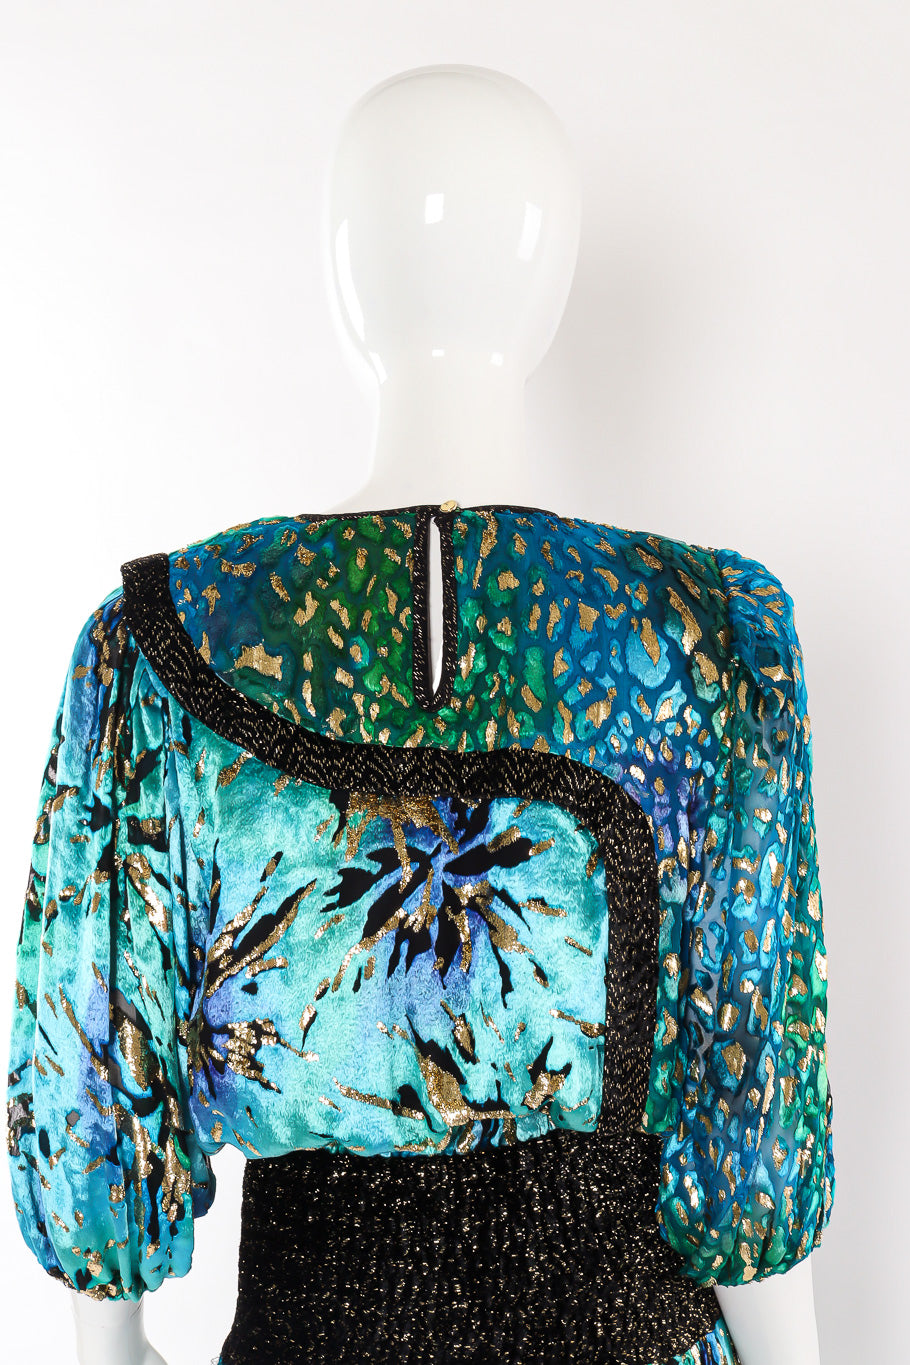 Multi-printed silk limited edition dress by Diane Freis back view on mannequin @recessla